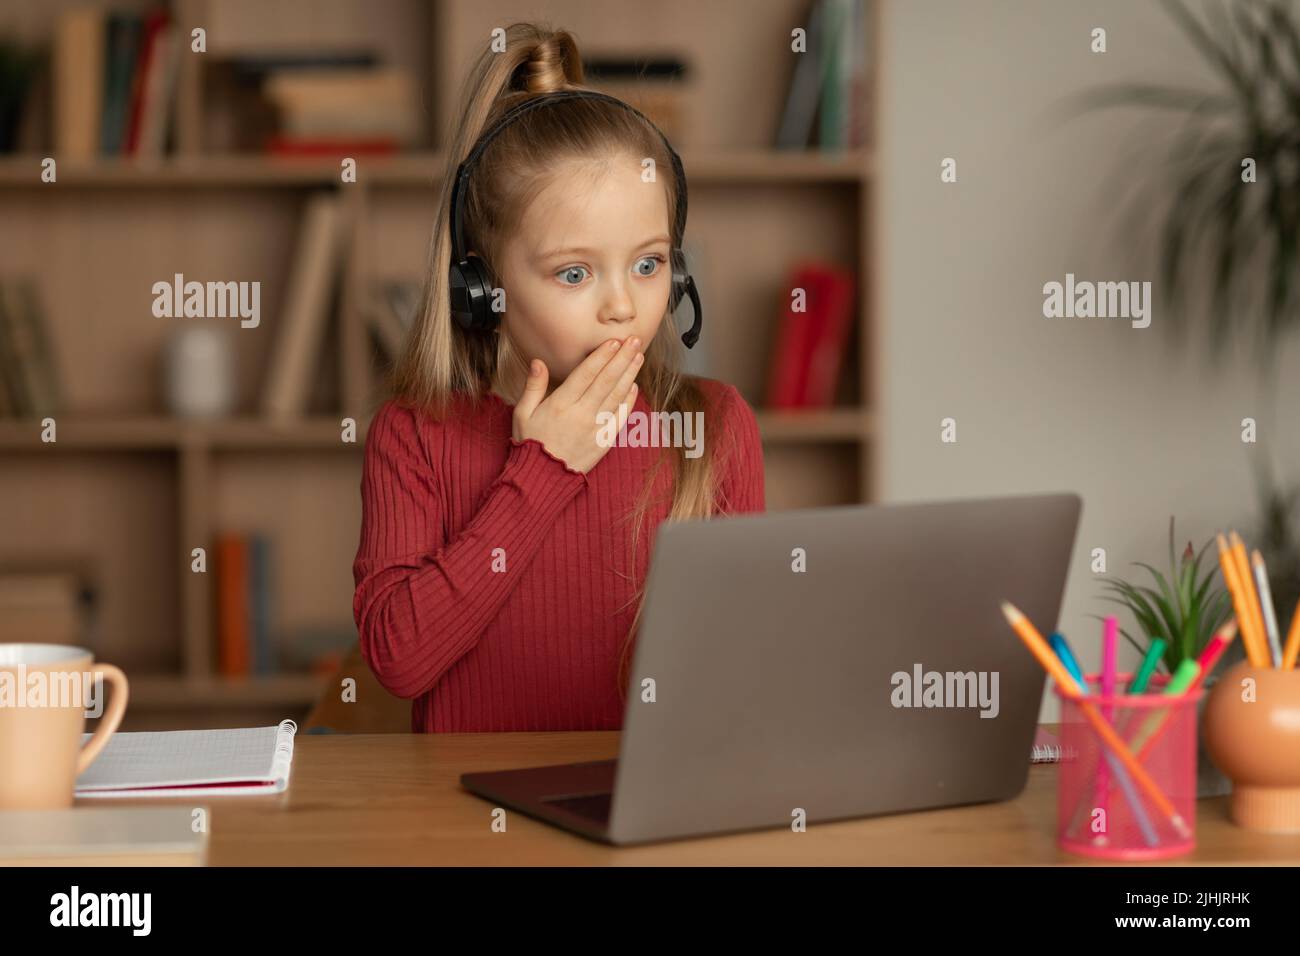 Shocked Kid Girl Looking At Laptop Computer Learning Online Indoors Stock Photo